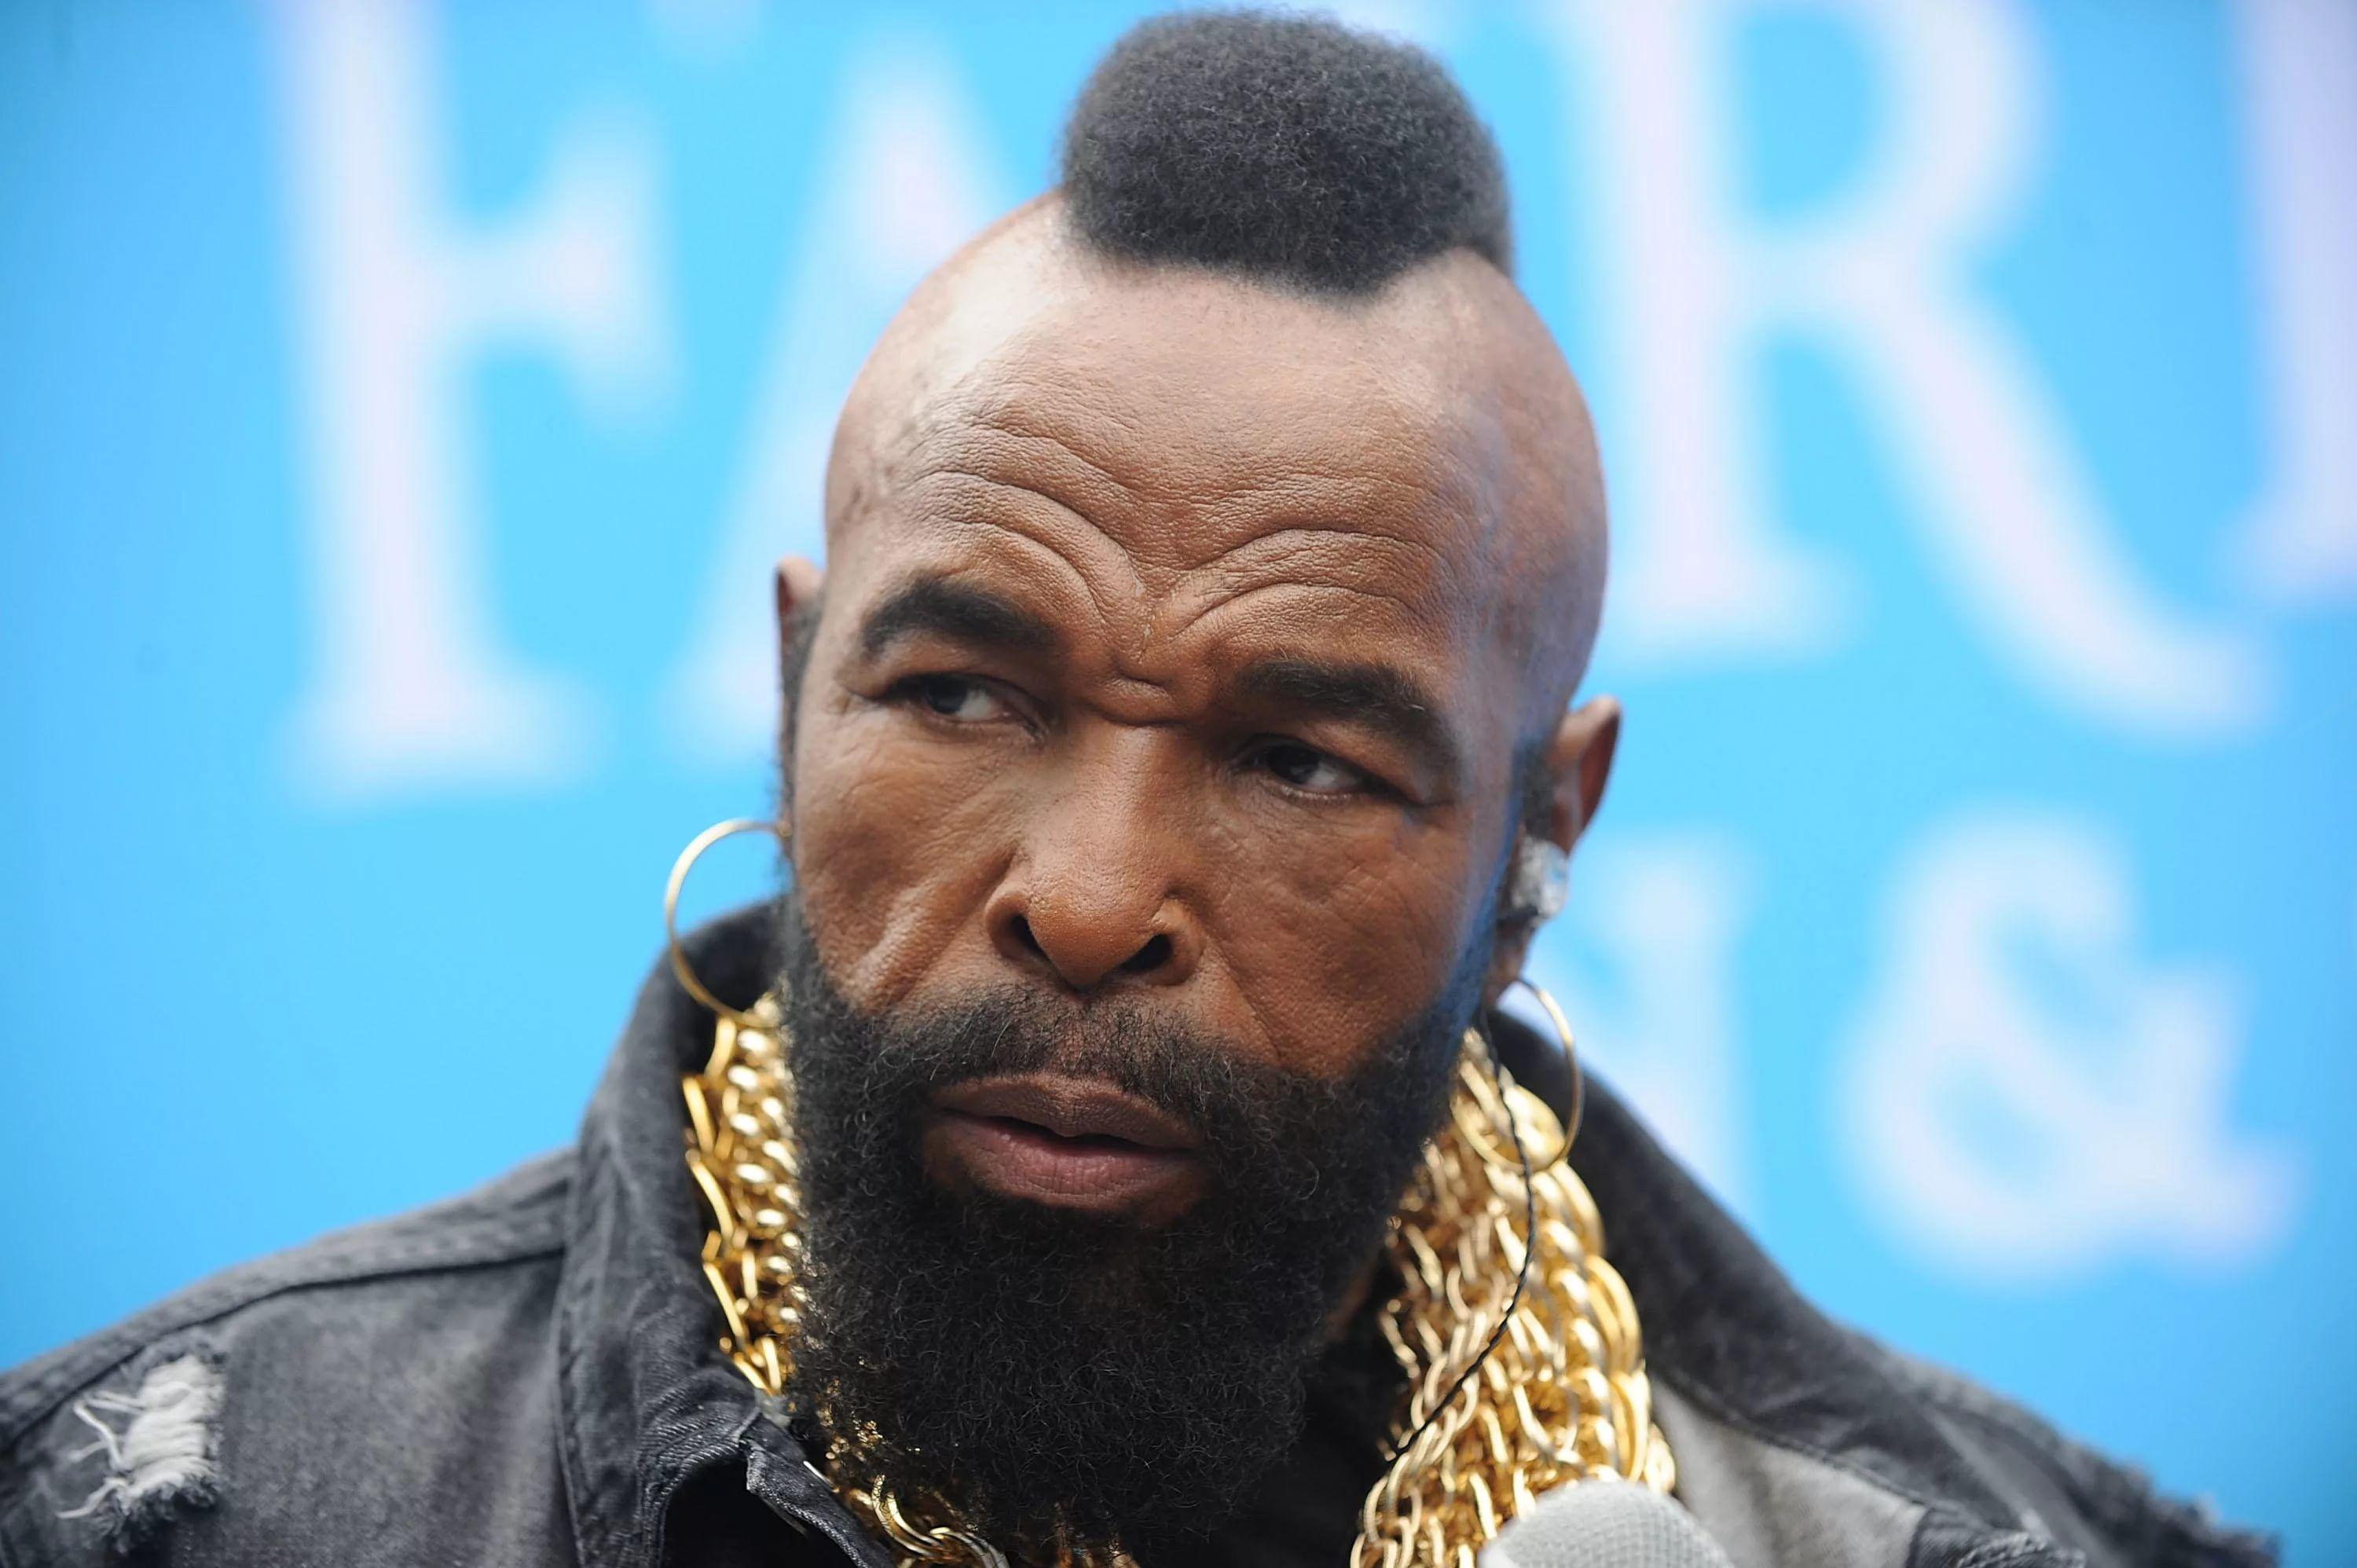 Mr. T HD Wallpapers free.